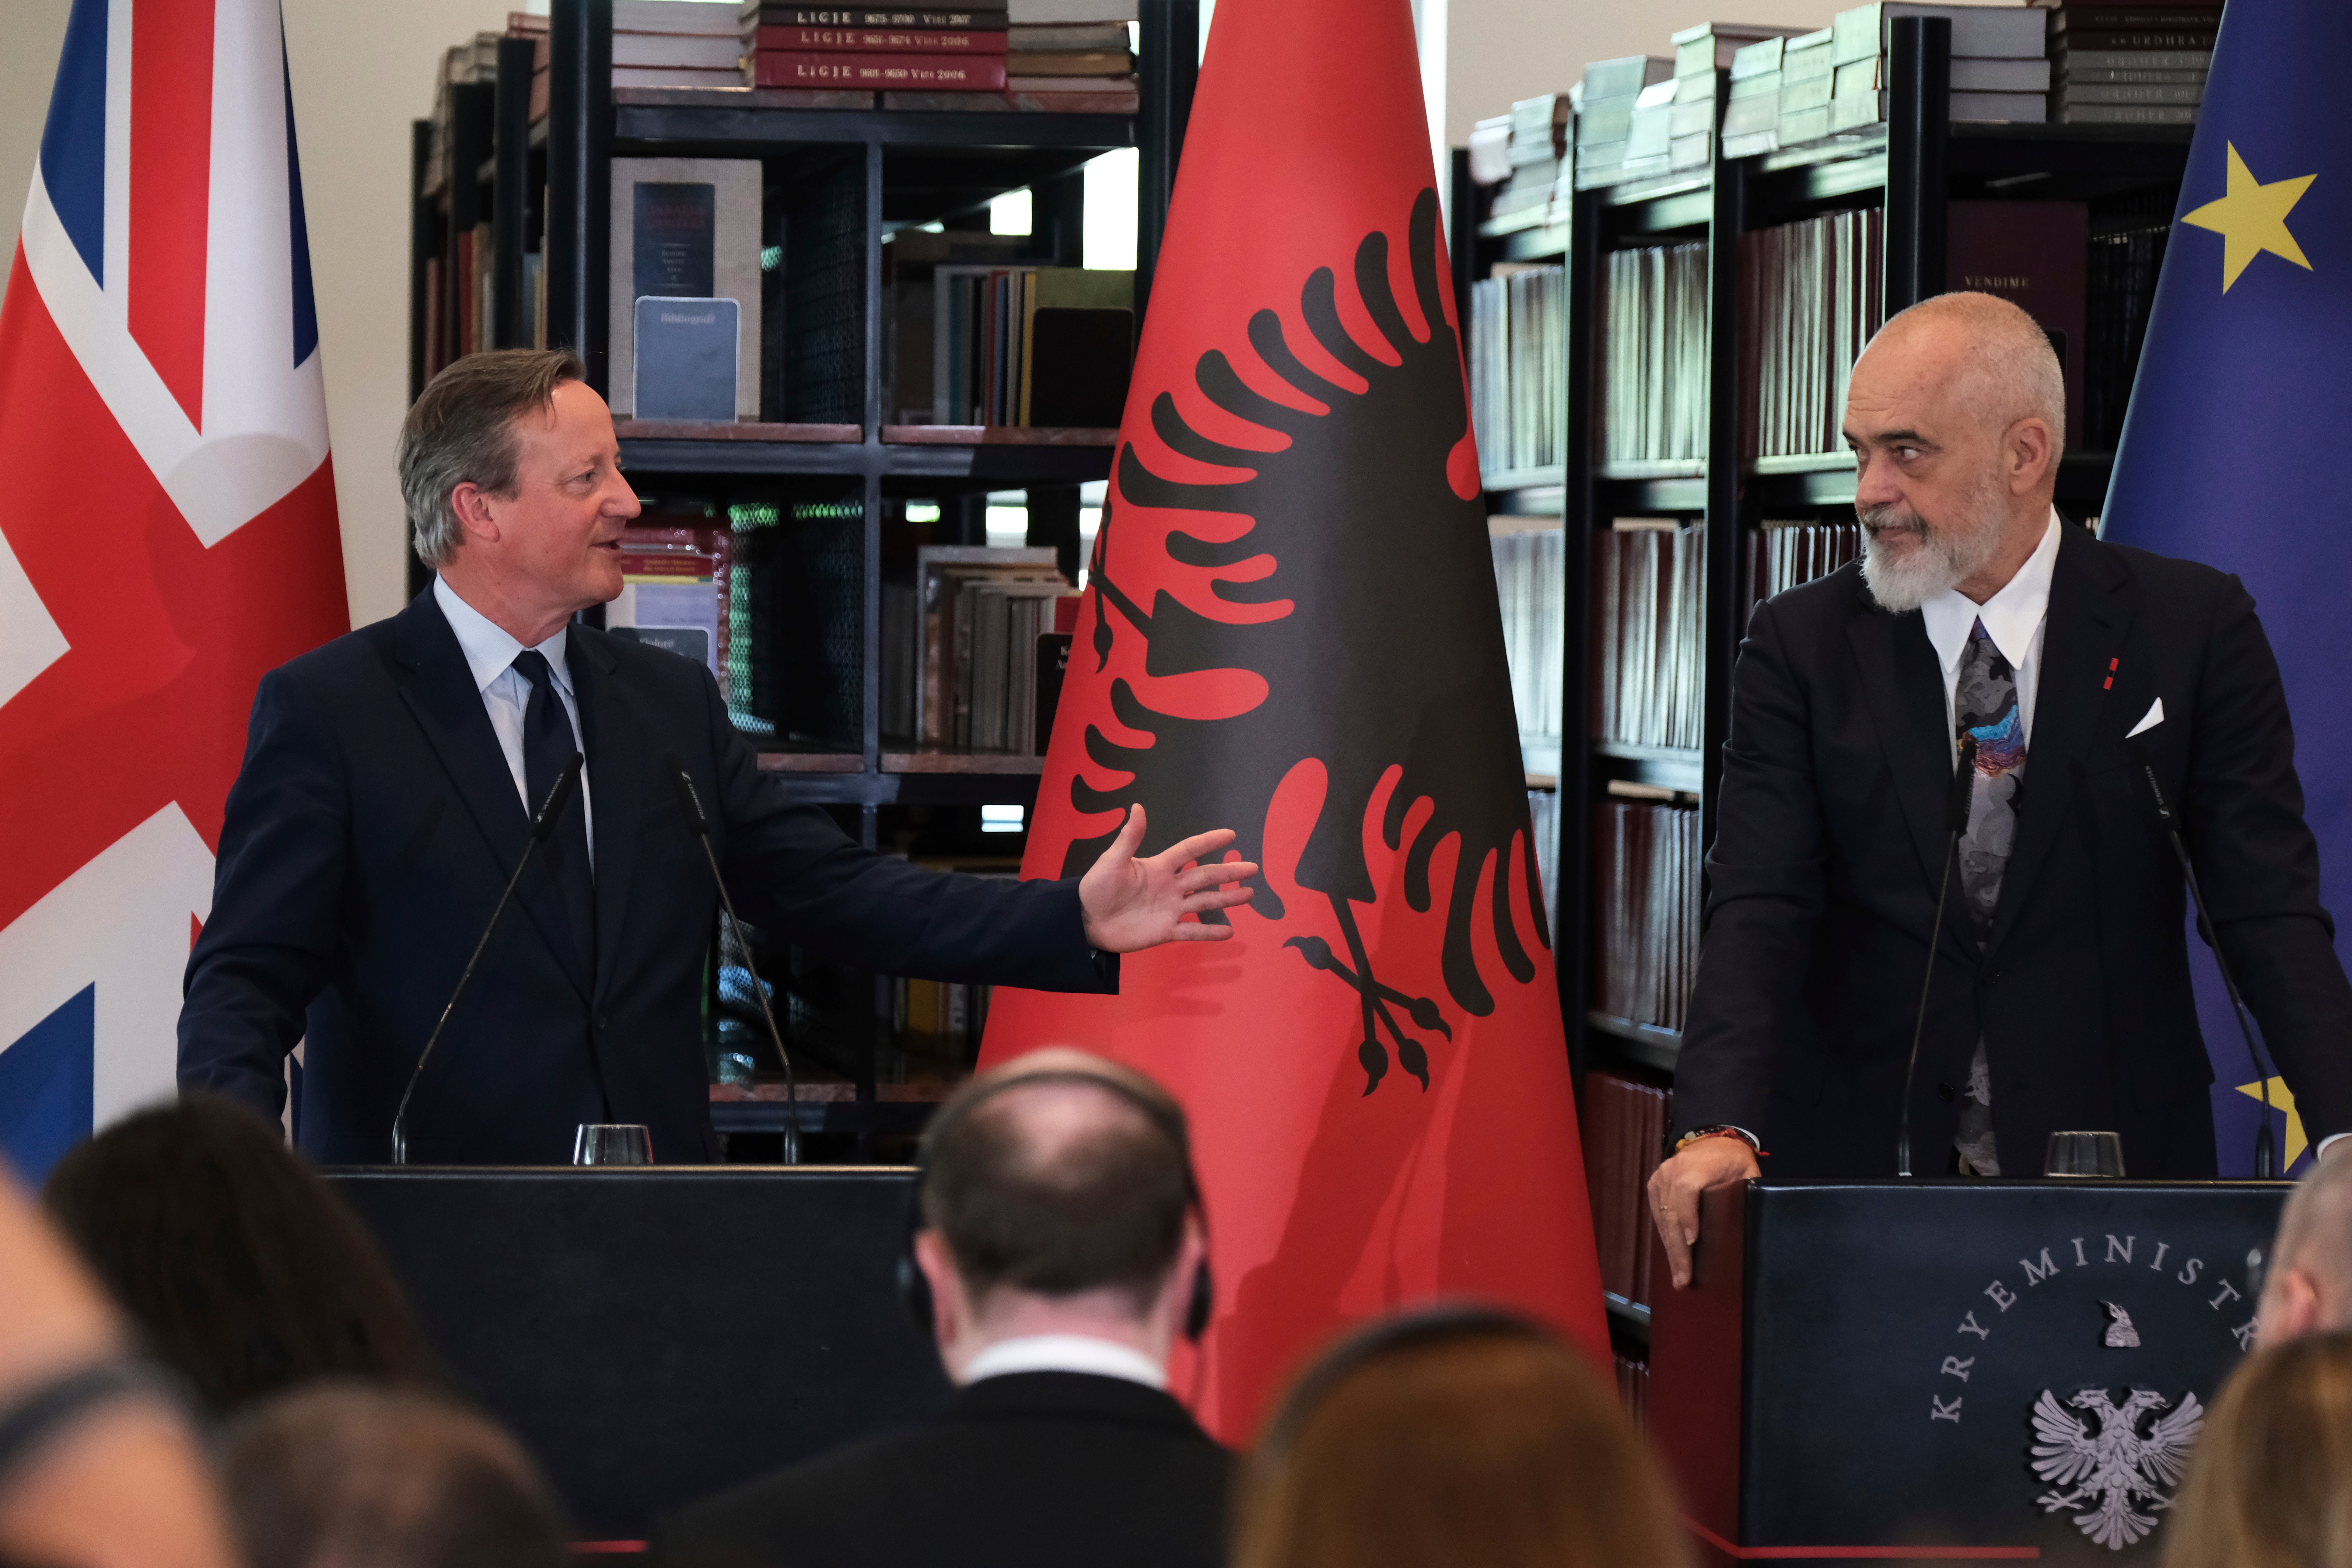 David Cameron cut short his trip to Albania to be back in the UK for a 4pm cabinet meeting